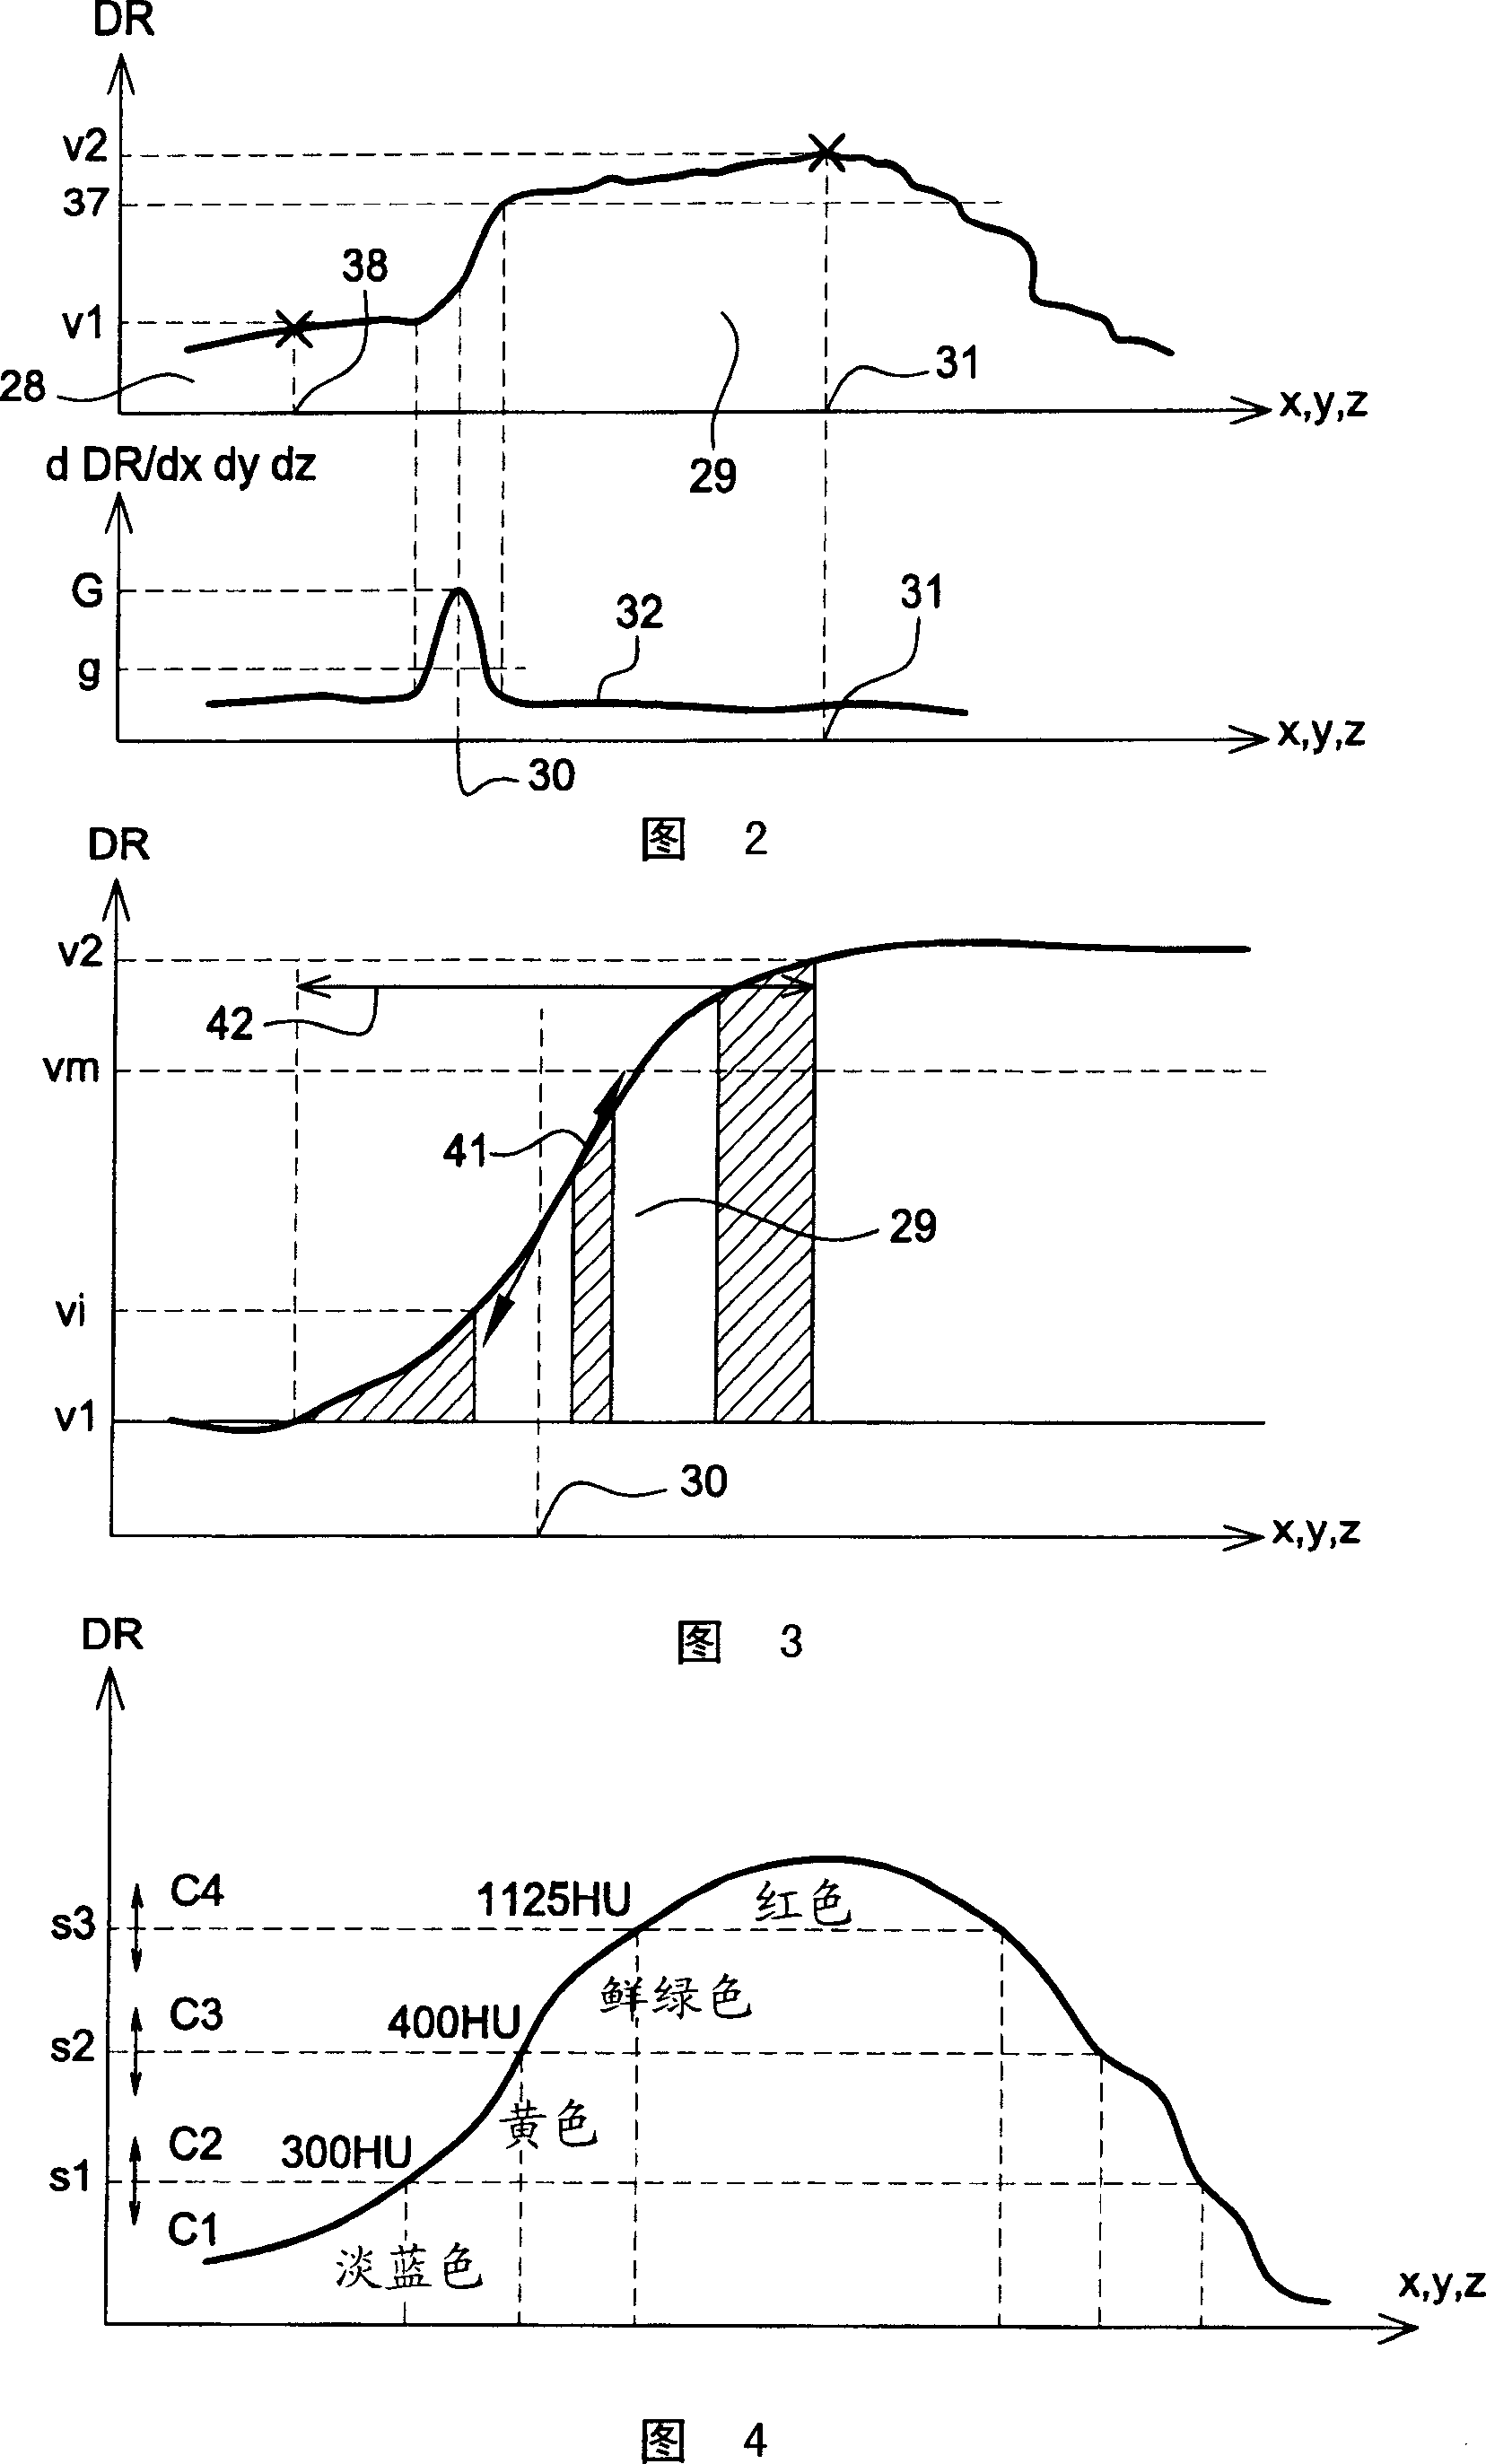 Method and apparatus for the preparation of a renal image